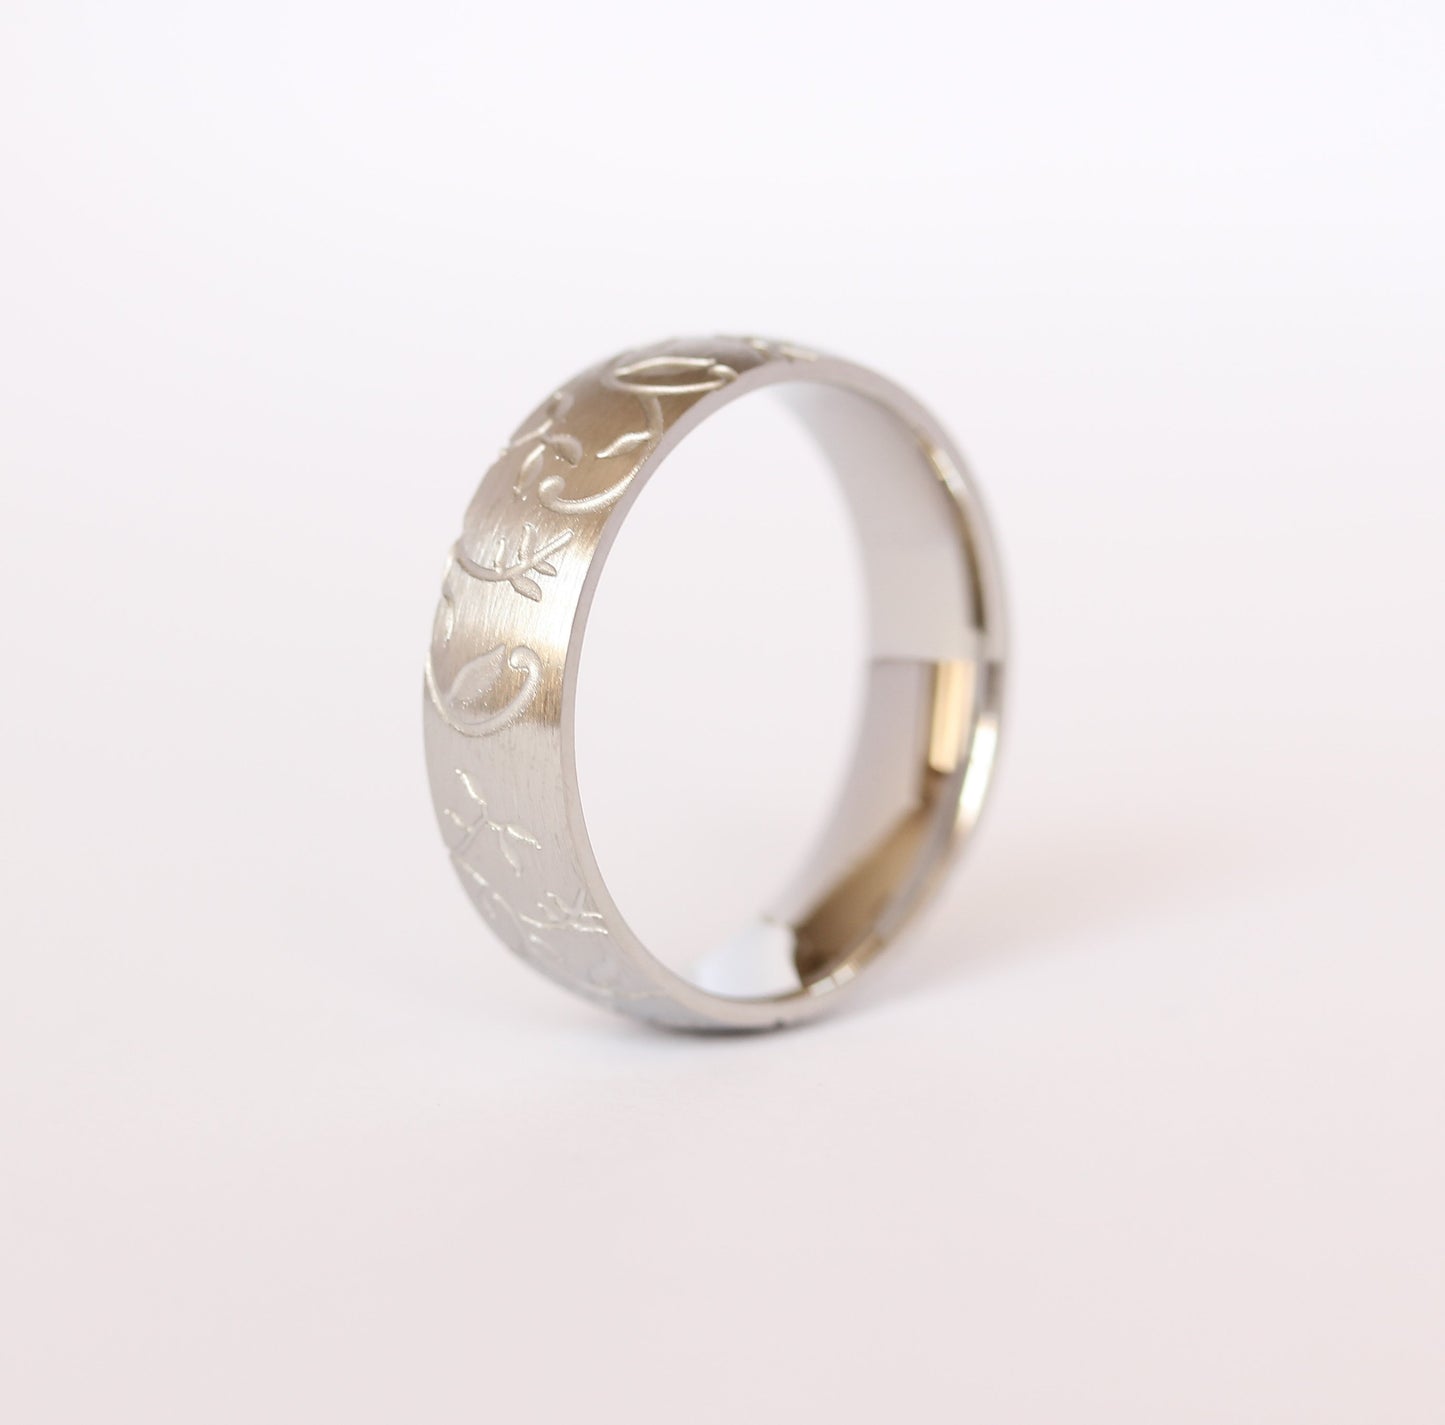 6mm wide Brushed White gold & Titanium with engraved detail Wedding ring band for men and women